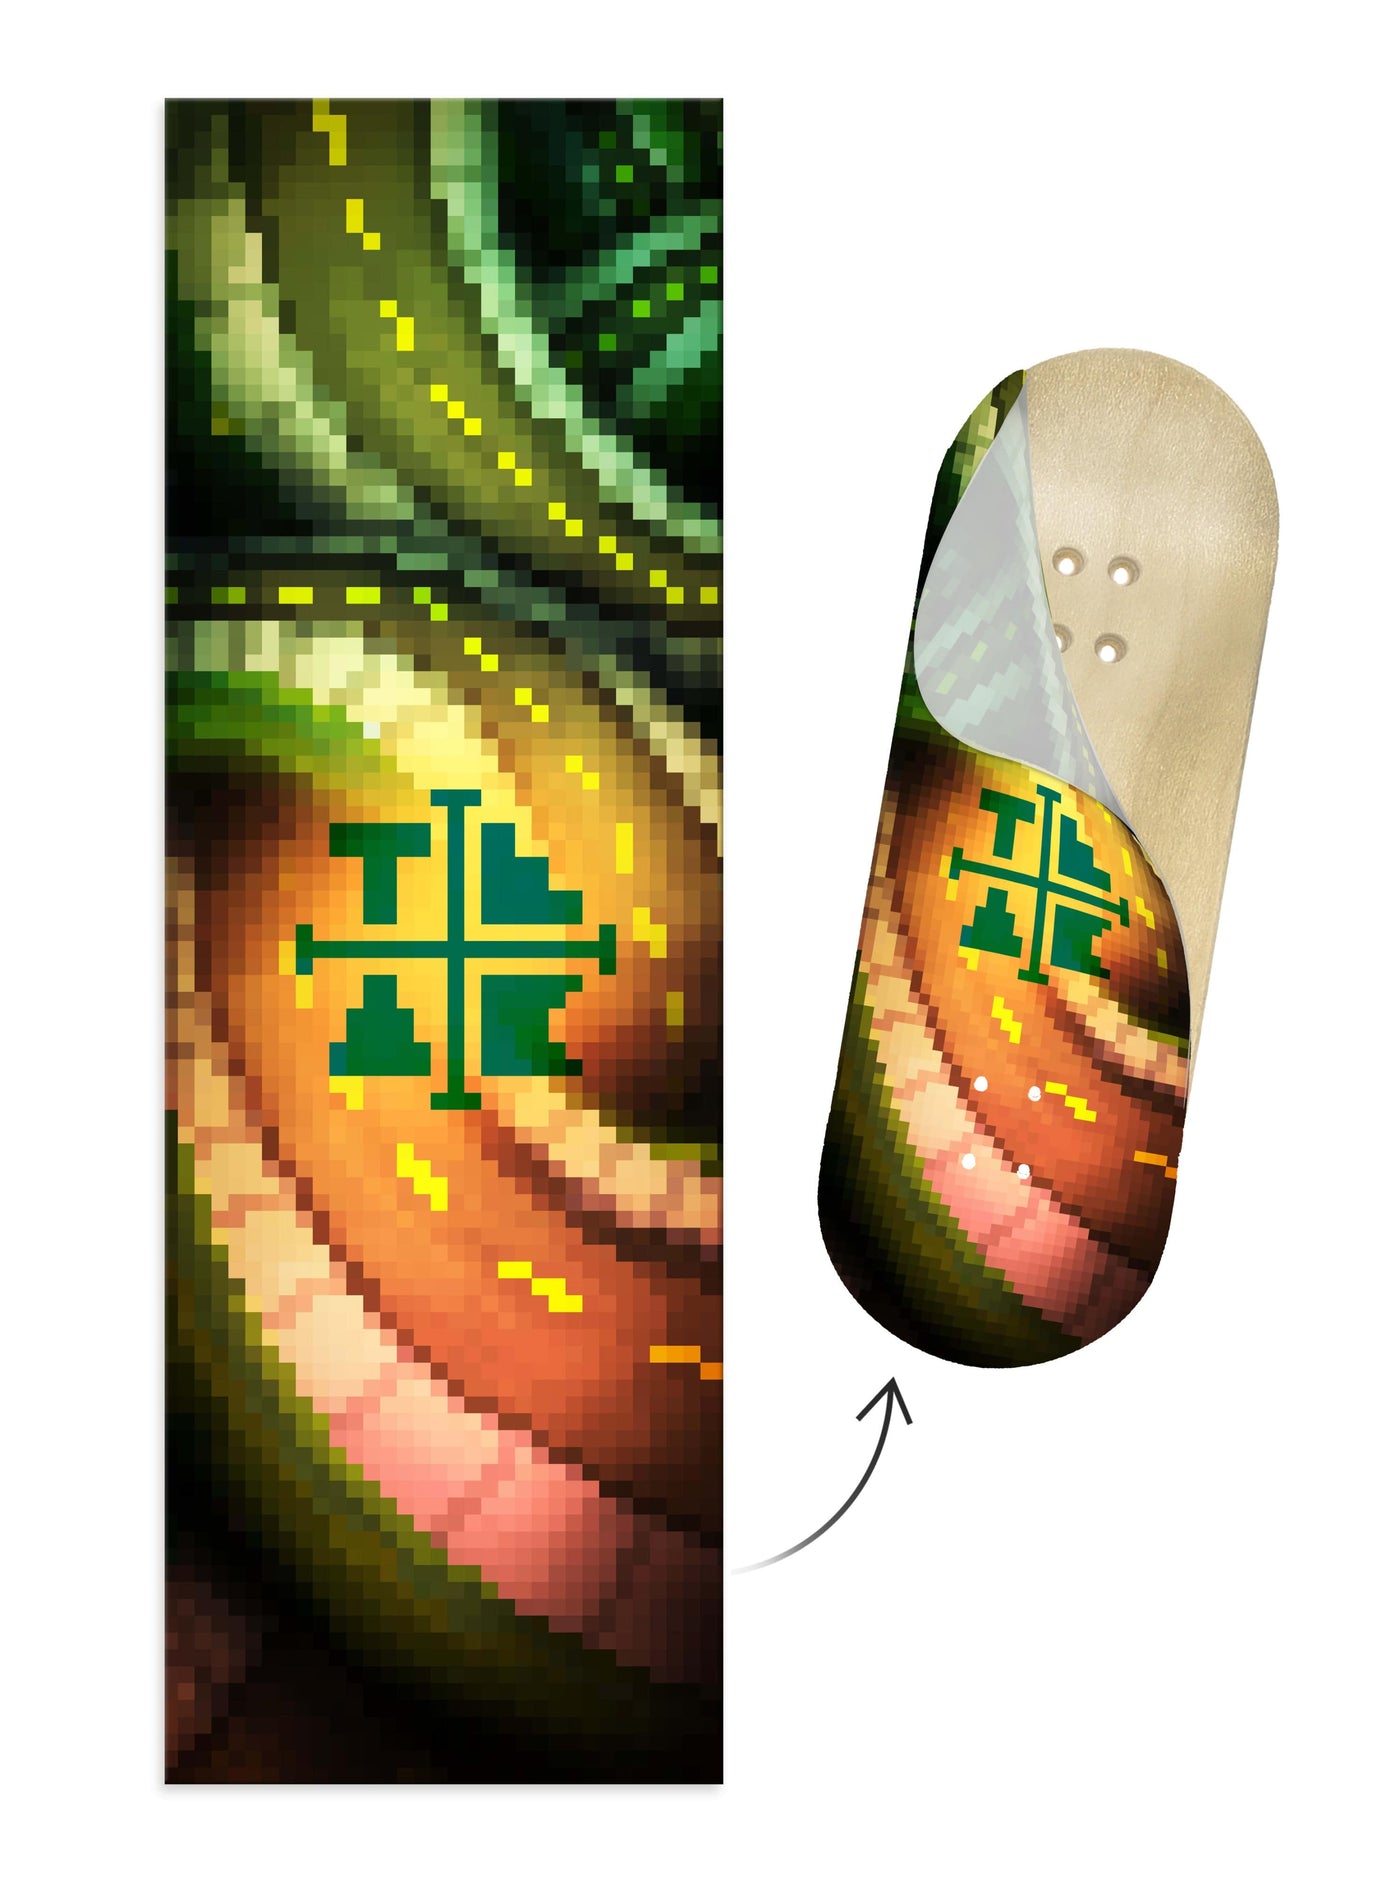 Teak Tuning "Winding Road" Artist Collaboration Deck Graphic Wrap - 35mm x 110mm